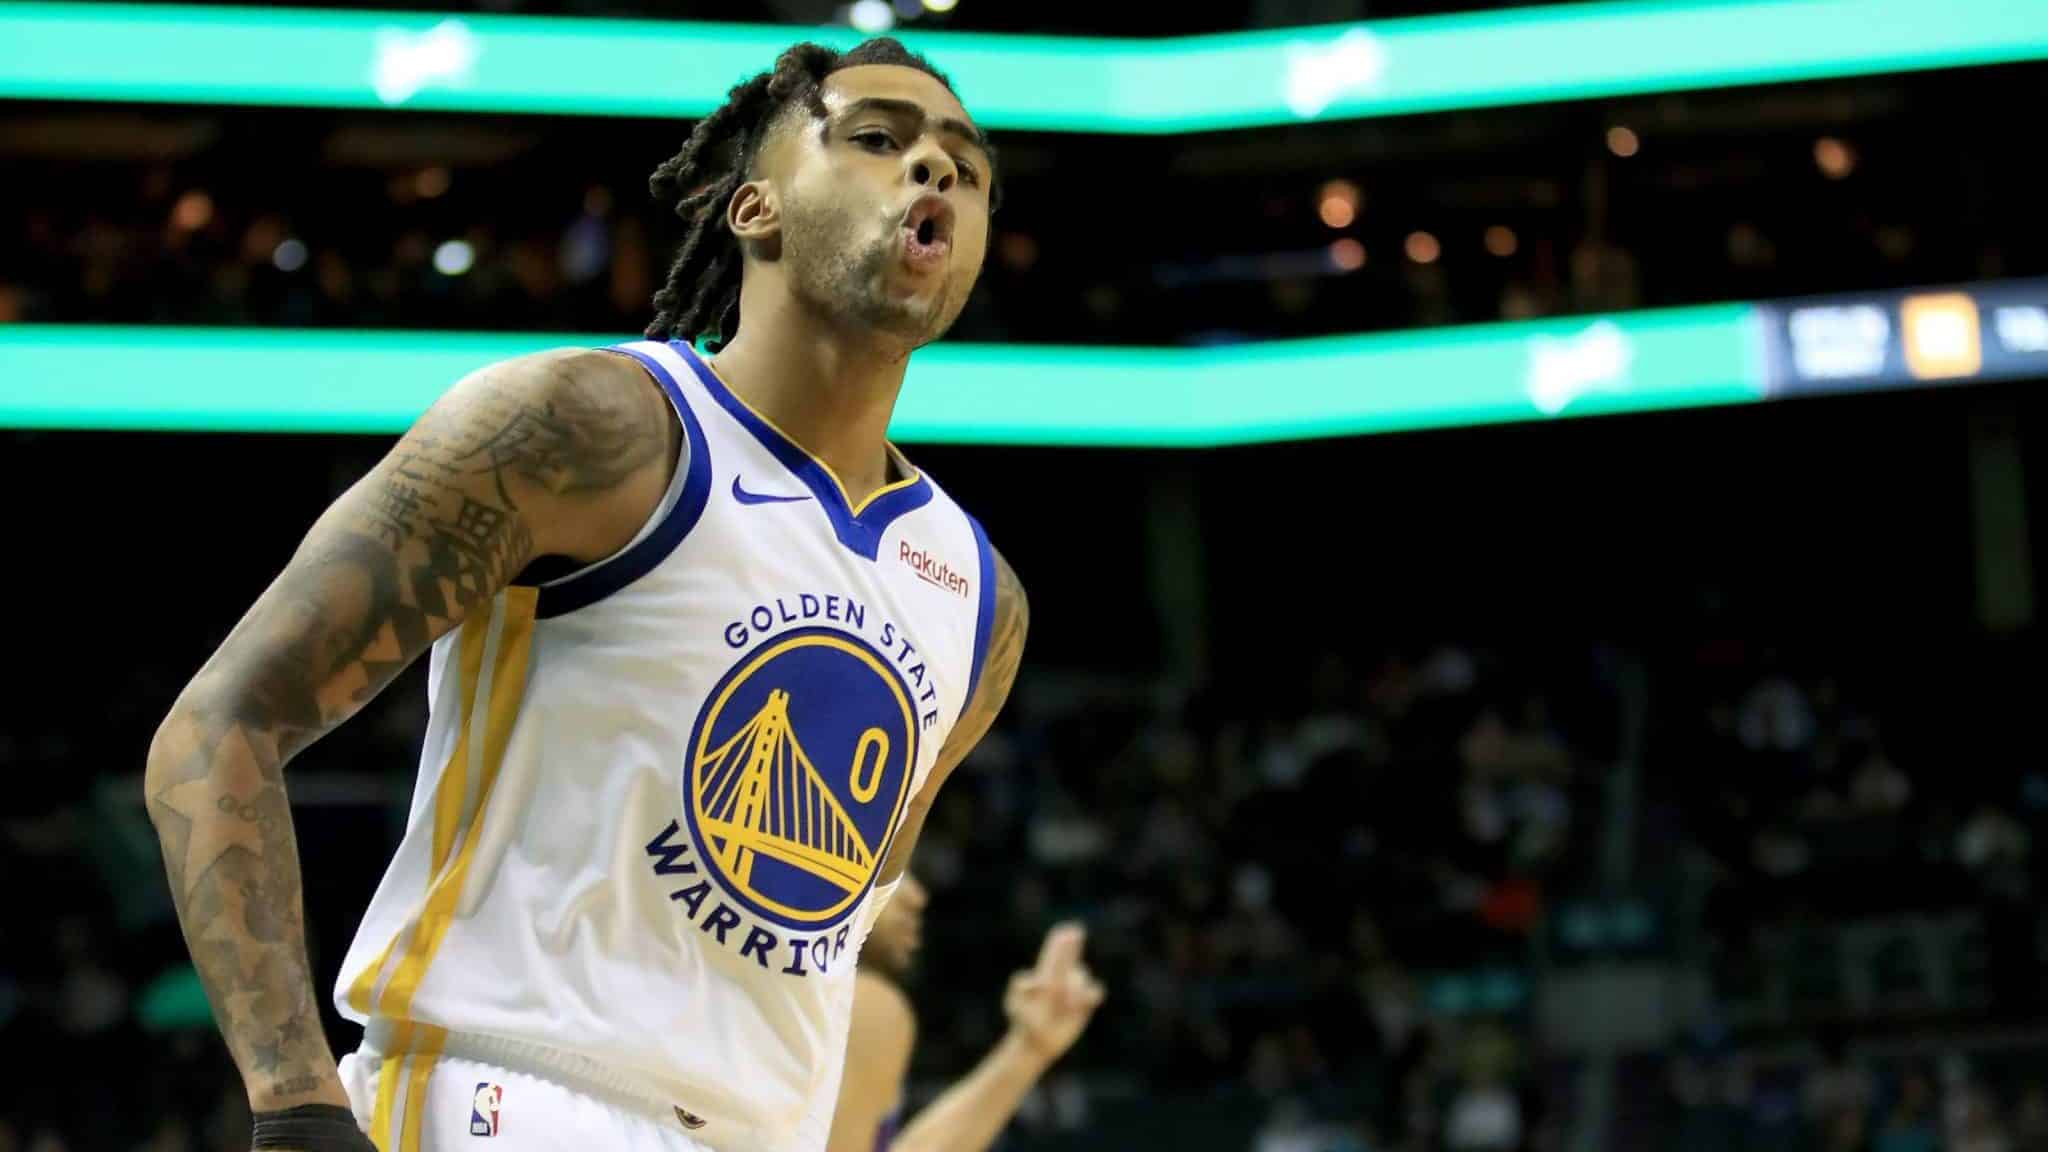 CHARLOTTE, NORTH CAROLINA - DECEMBER 04: D'Angelo Russell #0 of the Golden State Warriors reacts after making a basket against the Charlotte Hornets during their game at Spectrum Center on December 04, 2019 in Charlotte, North Carolina. NOTE TO USER: User expressly acknowledges and agrees that, by downloading and or using this photograph, User is consenting to the terms and conditions of the Getty Images License Agreement. (Photo by Streeter Lecka/Getty Images)